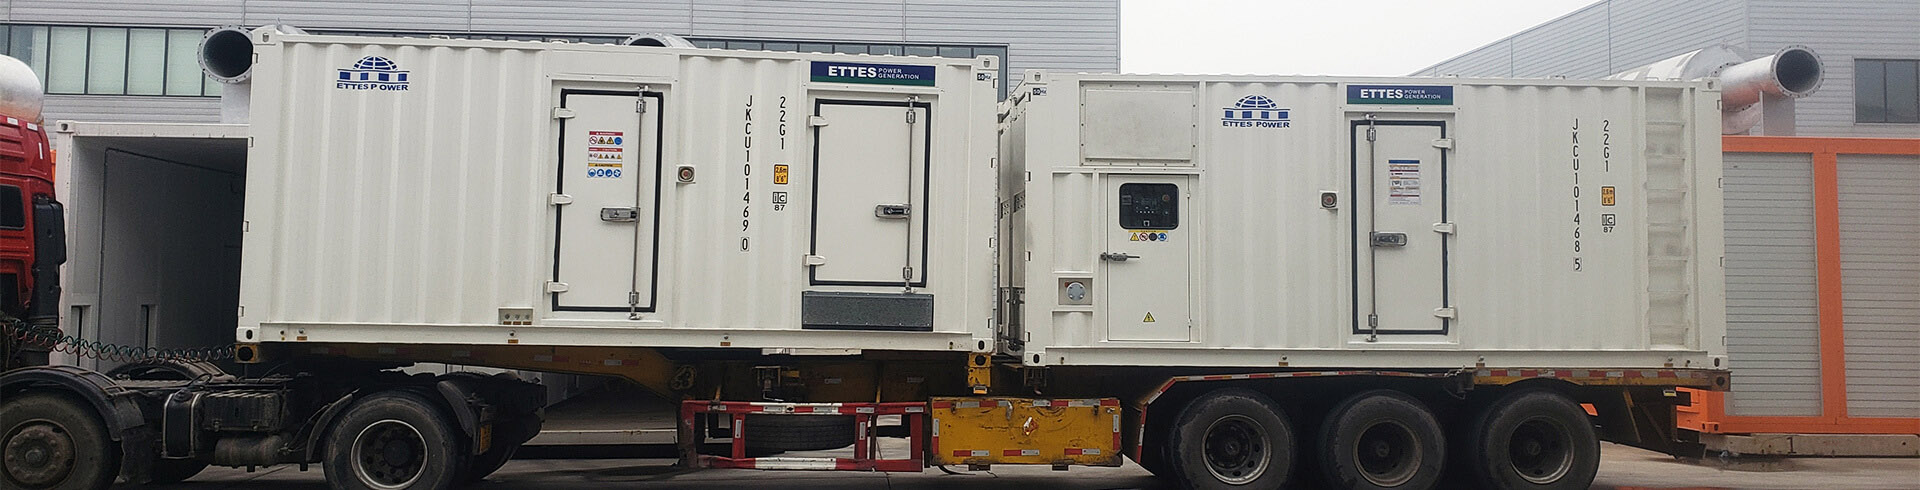 Cummins 500kW container natural gas engine generator & CHP for transportation ETTES POWER